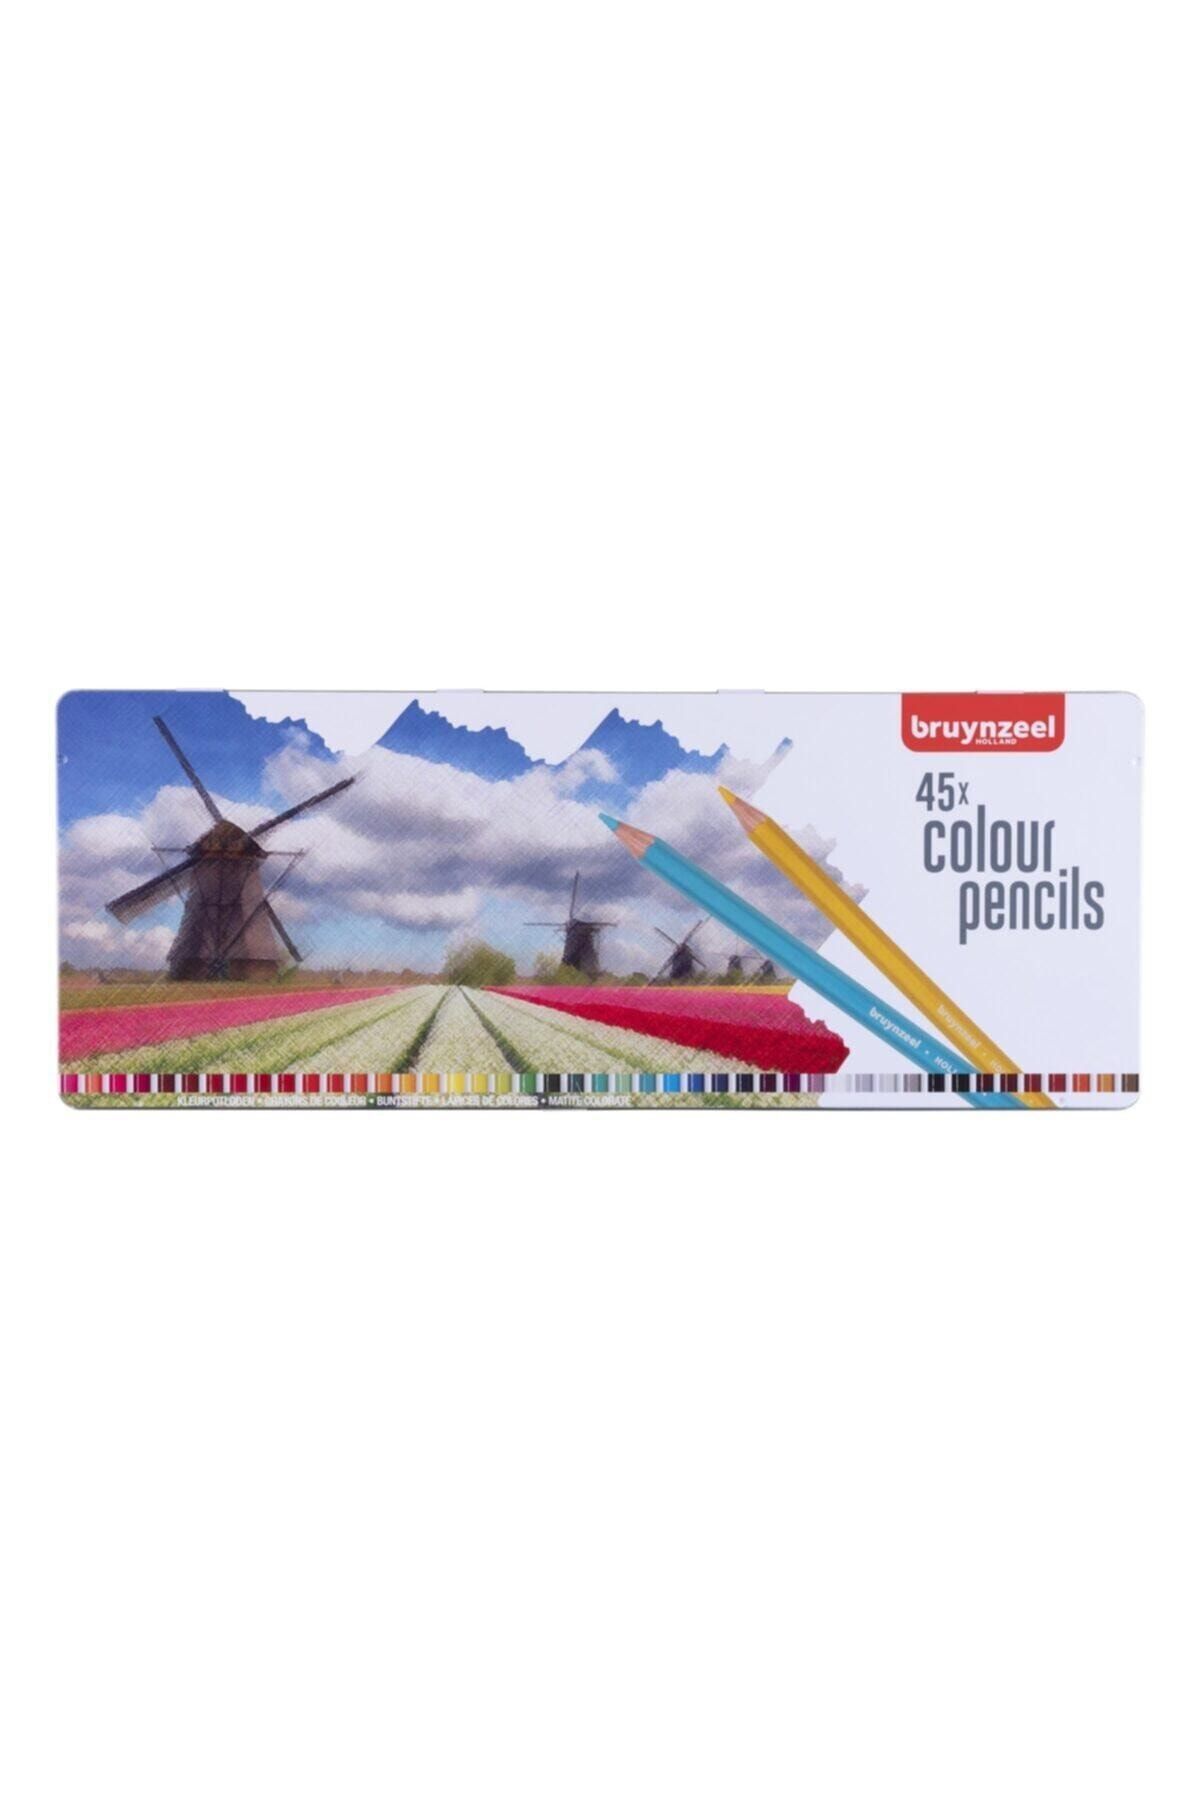 Bruynzeel Eurocolor Colored Pencil Crayons Woody Brand Box Set Made in  Holland